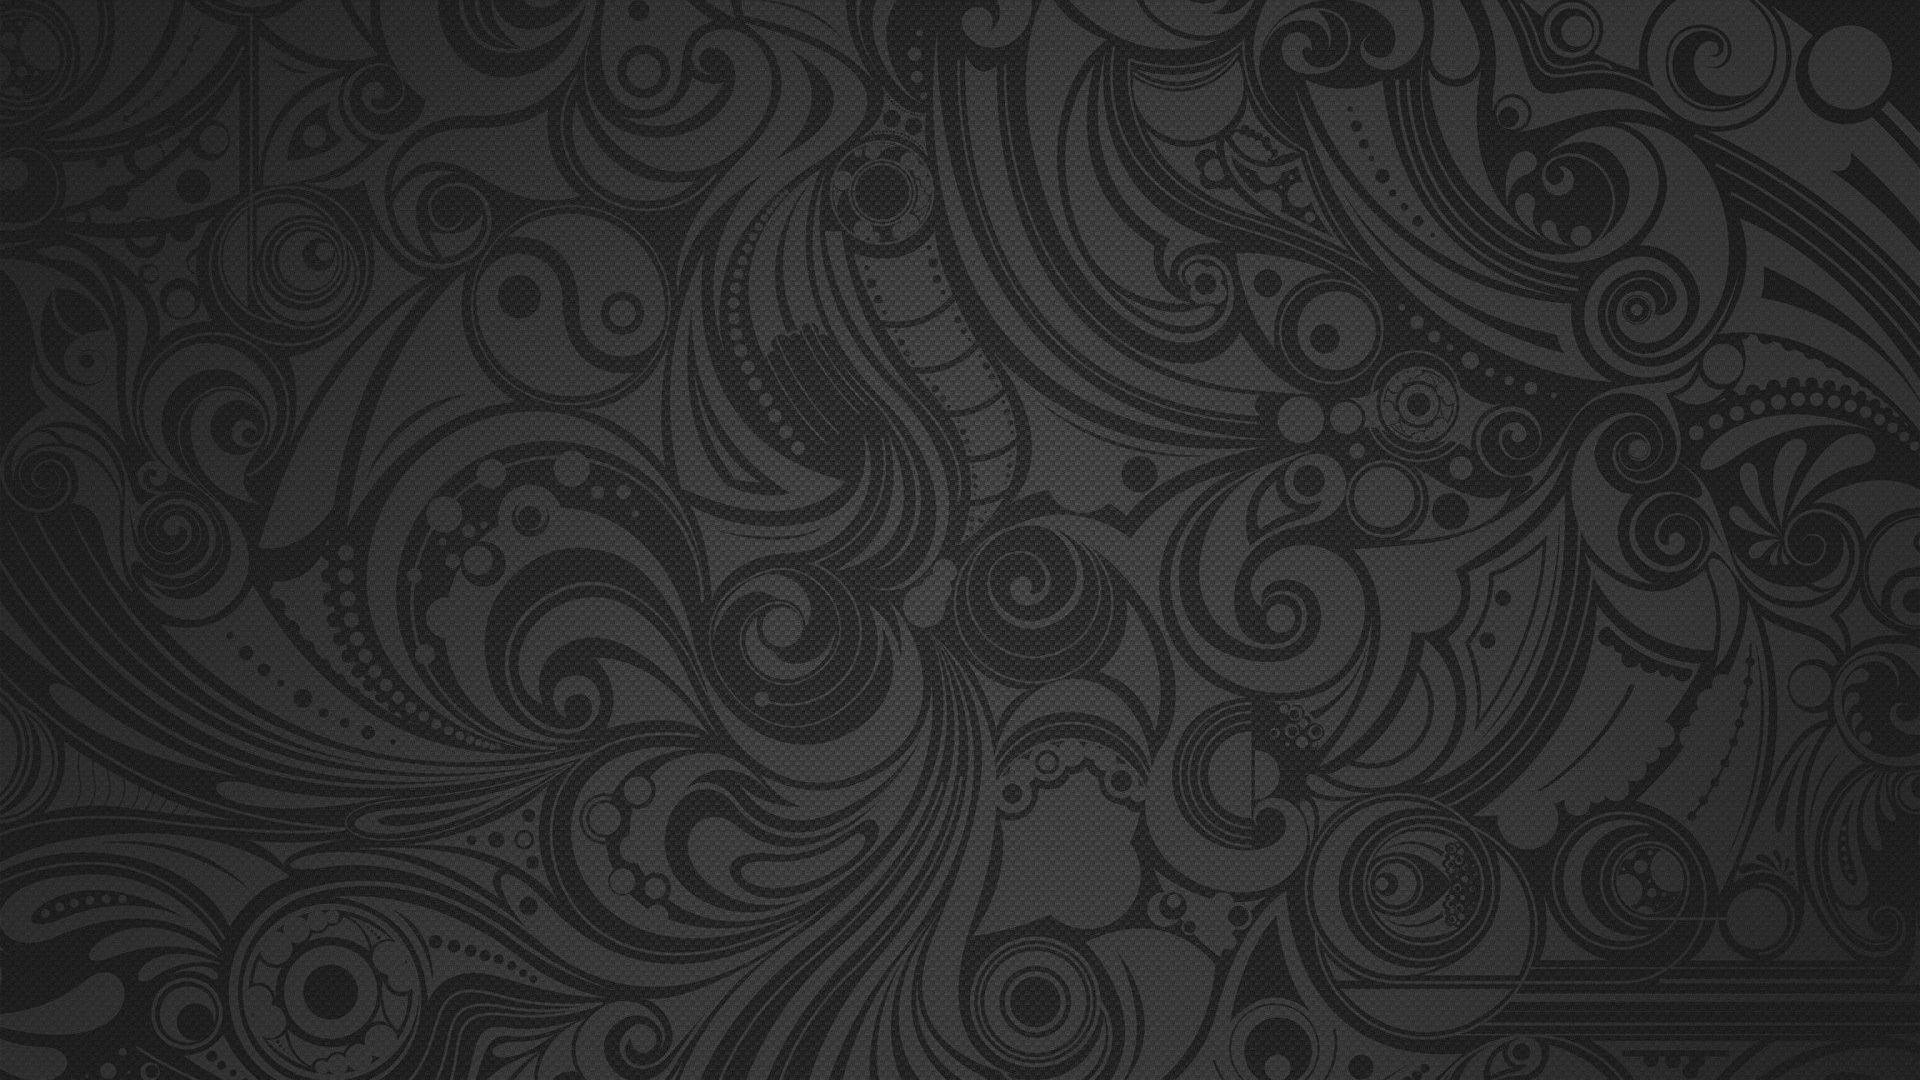 Black And Grey Hd Wallpapers Top Free Black And Grey Hd Backgrounds